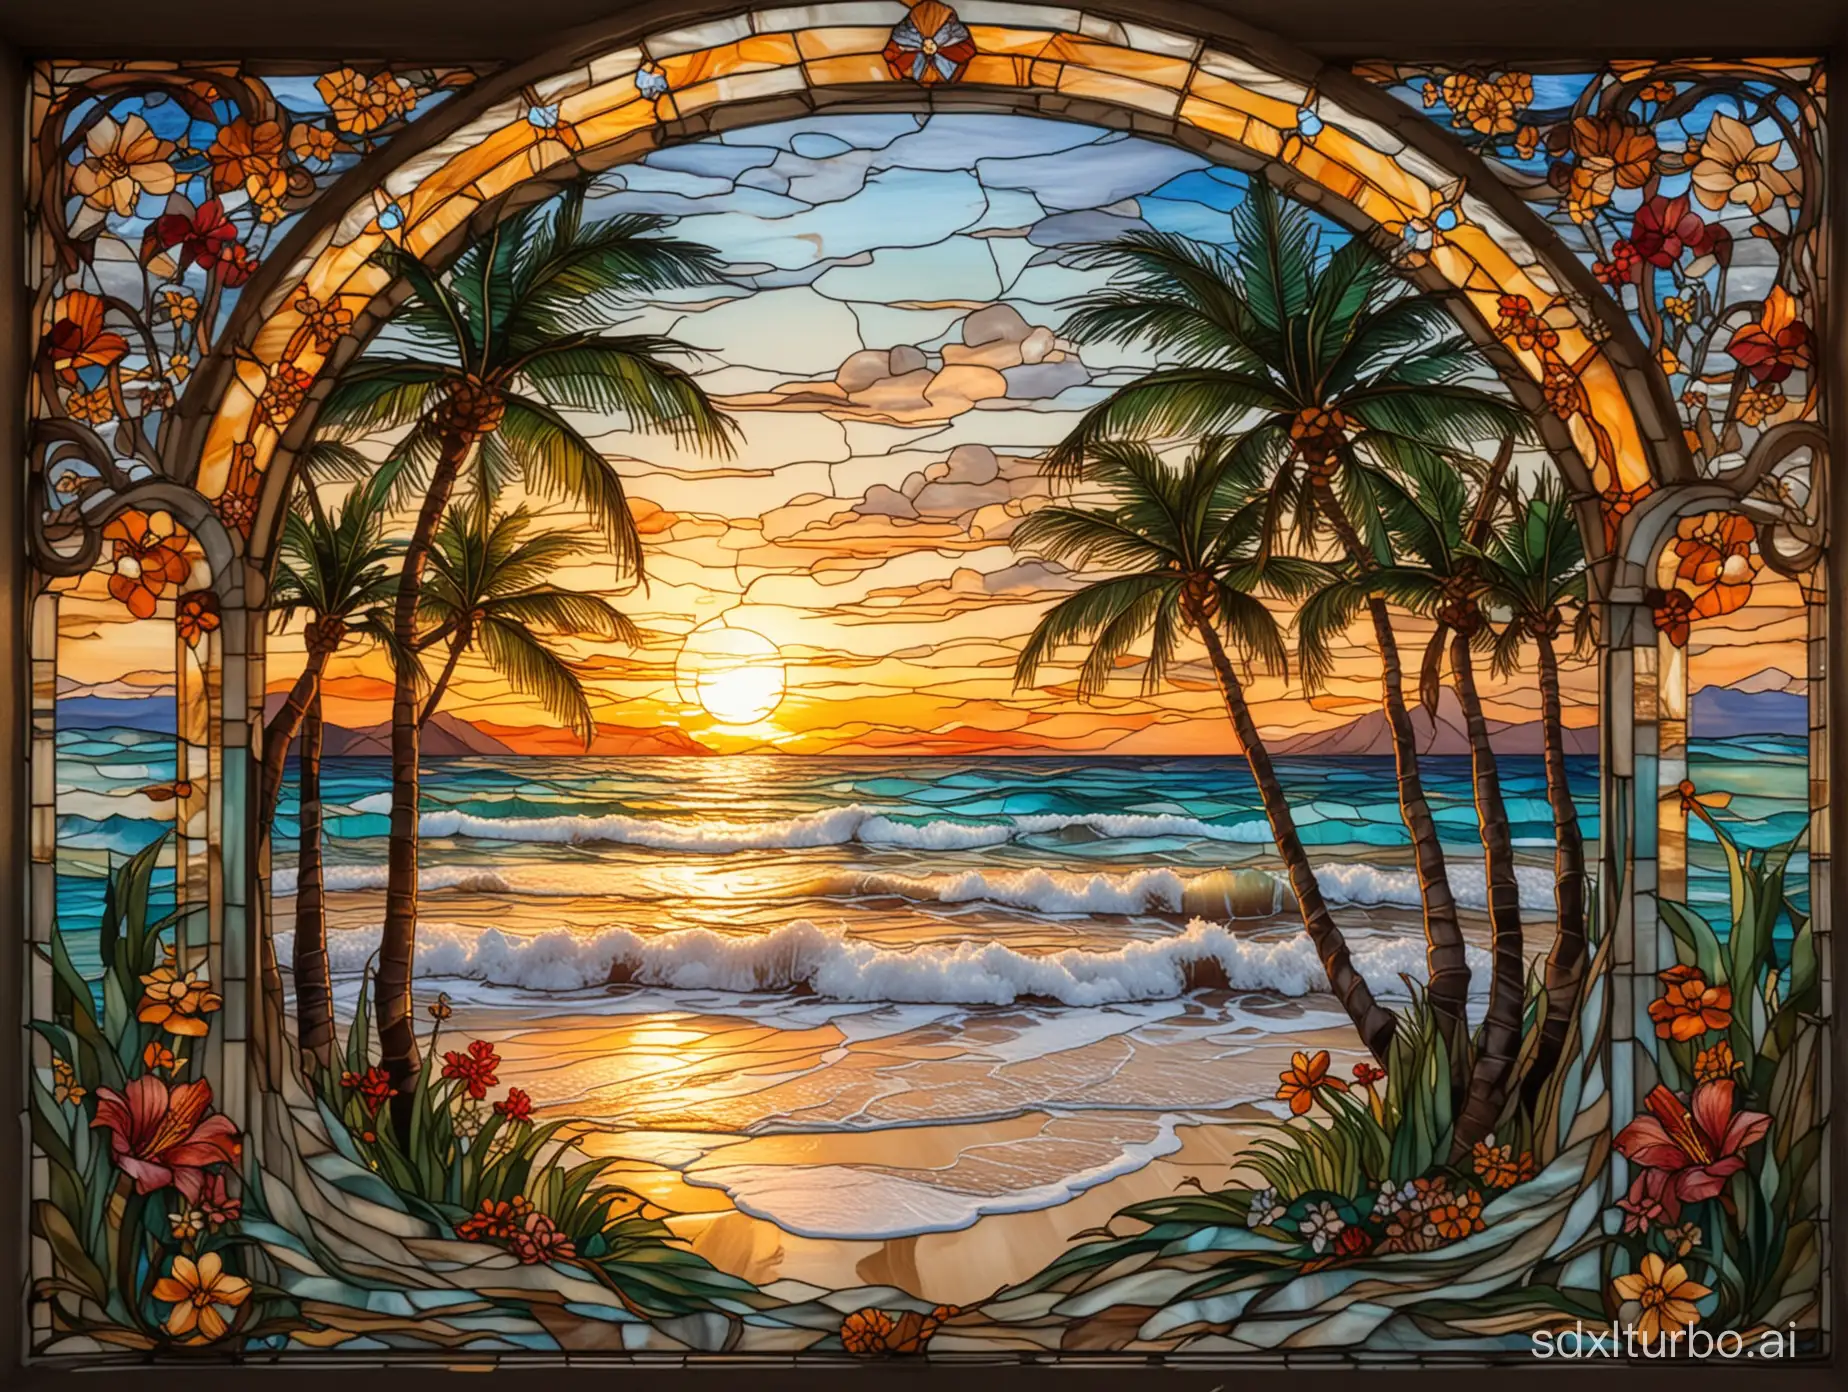 Art-Nouveau-Stained-Glass-Window-Sunset-Beach-Scene-with-Tropical-Flora